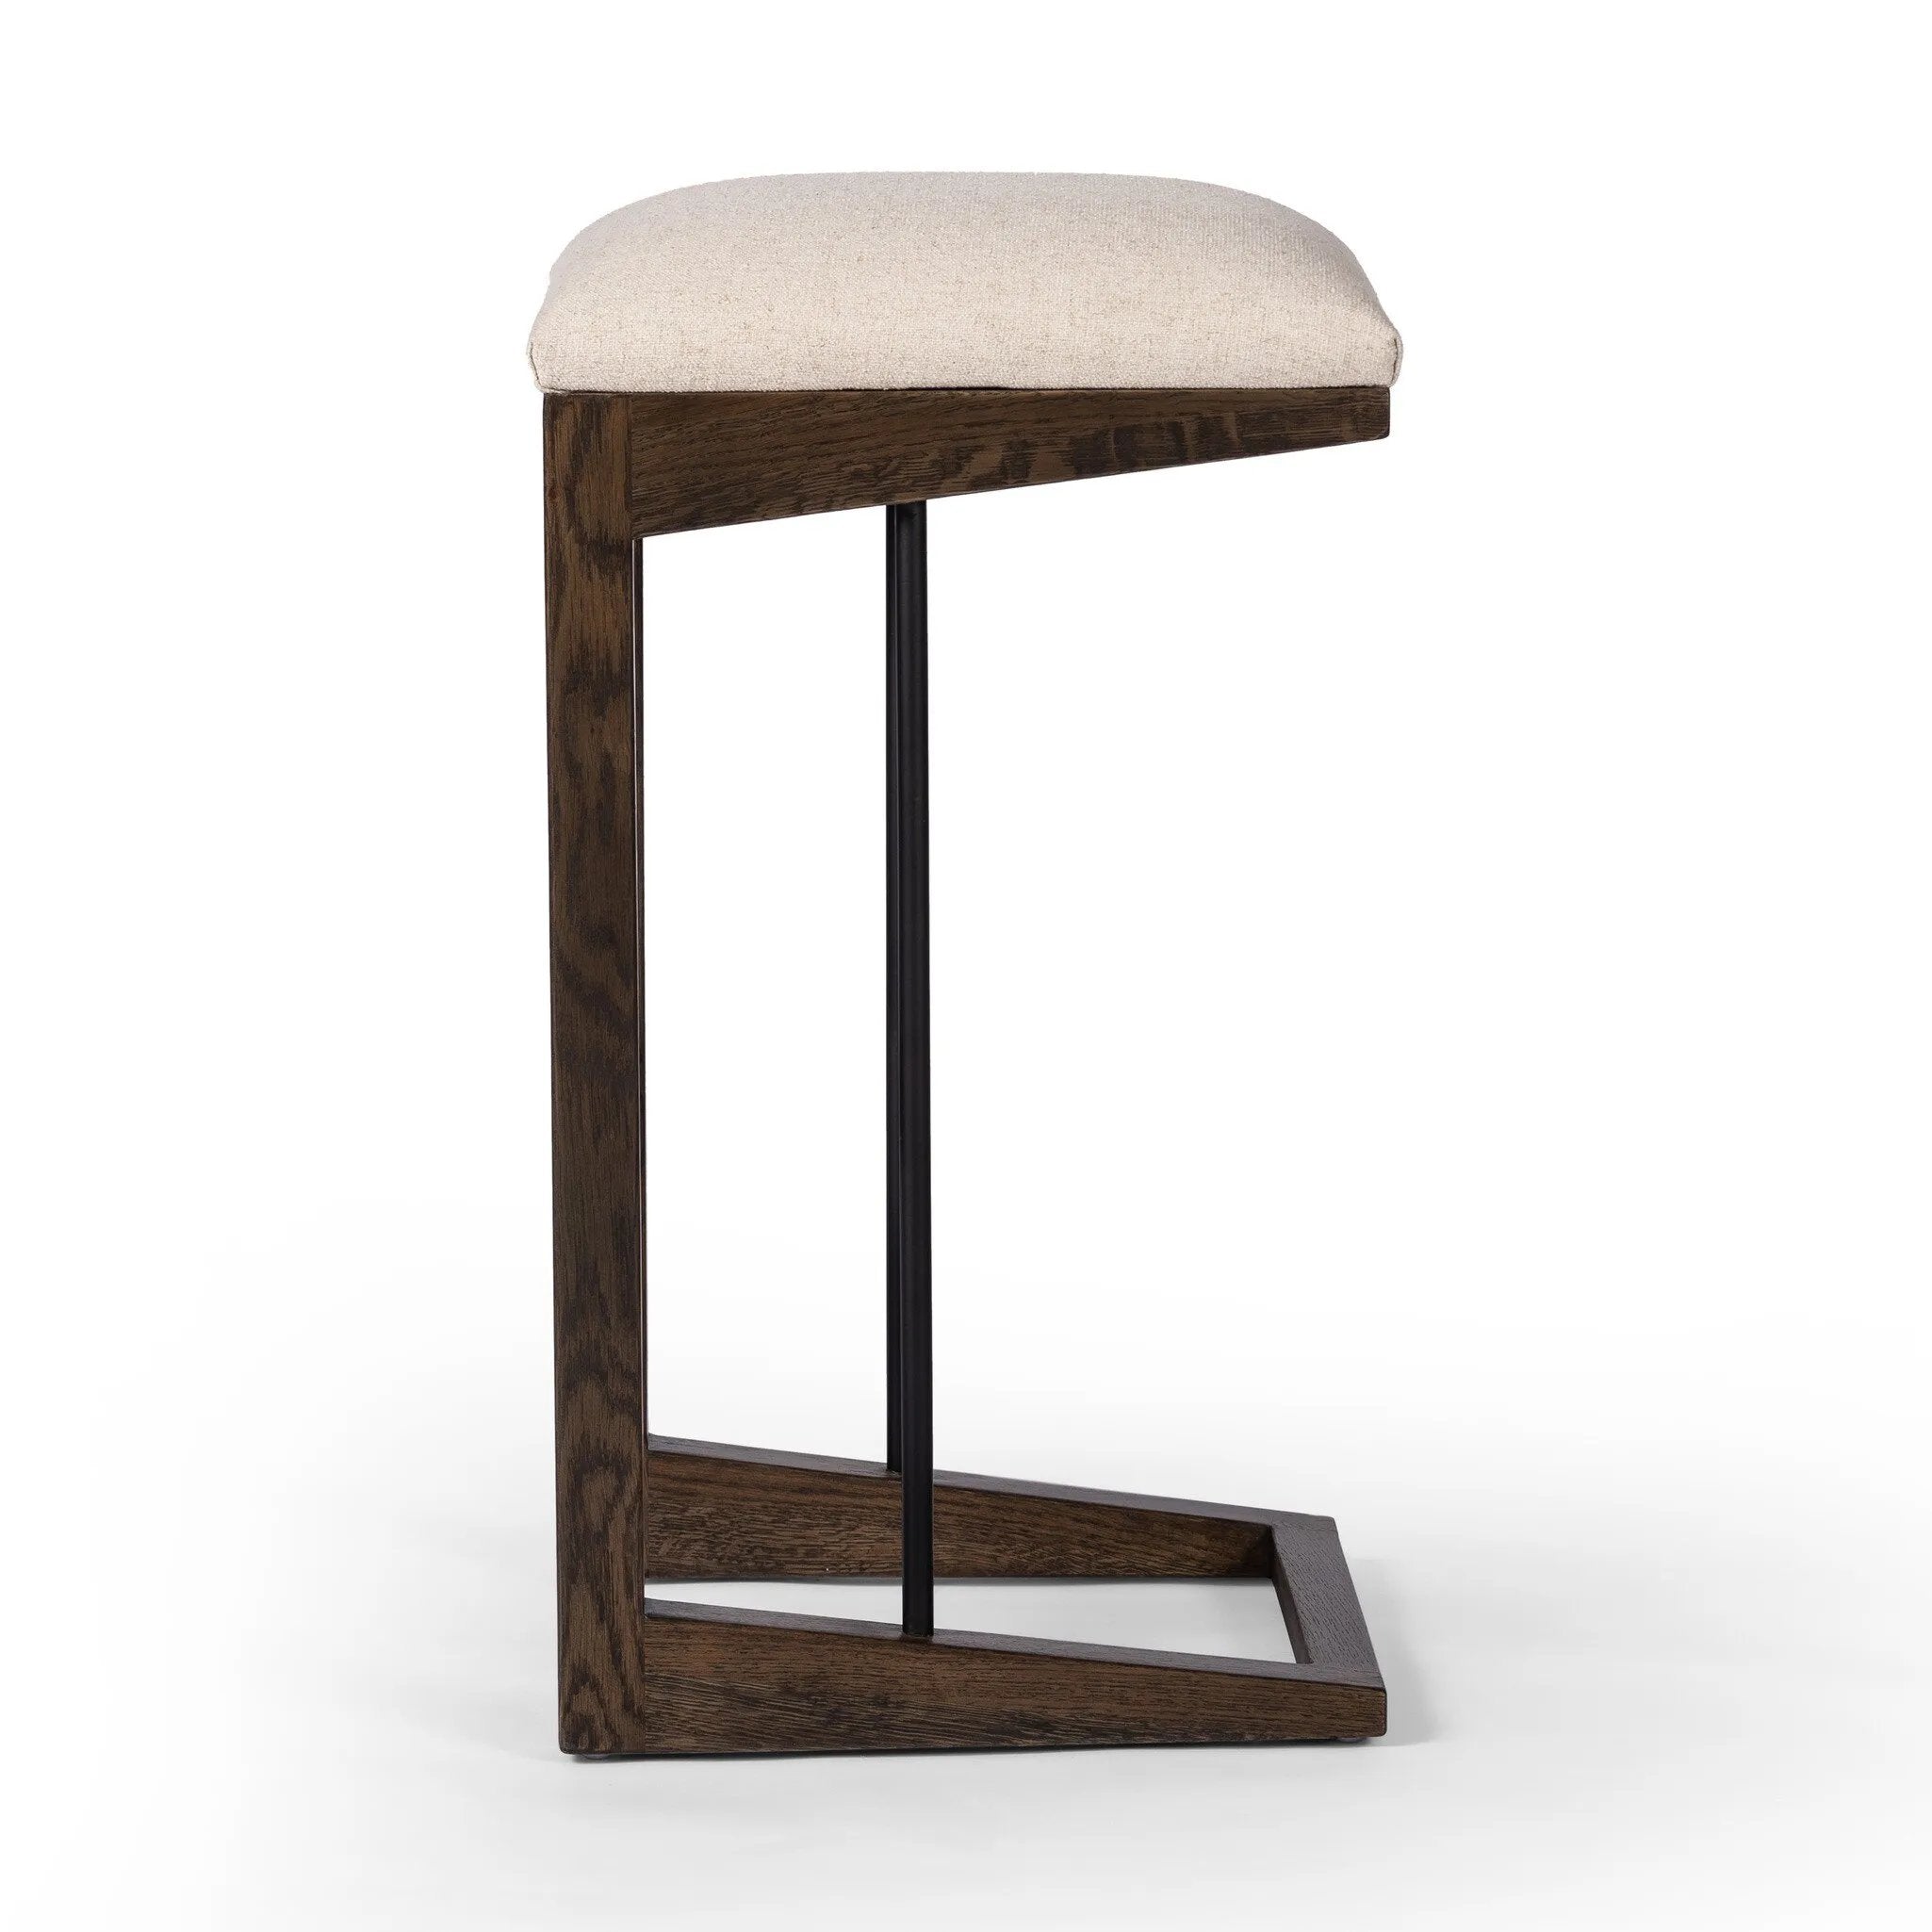 A stunner from every angle, this architecturally inspired stool features an angular base crafted from solid oak with two iron rods for added support and visual interest. Seat is upholstered in a linen/cotton/poly blend performance fabric with subtle texture throughout. Amethyst Home provides interior design, new home construction design consulting, vintage area rugs, and lighting in the Salt Lake City metro area.